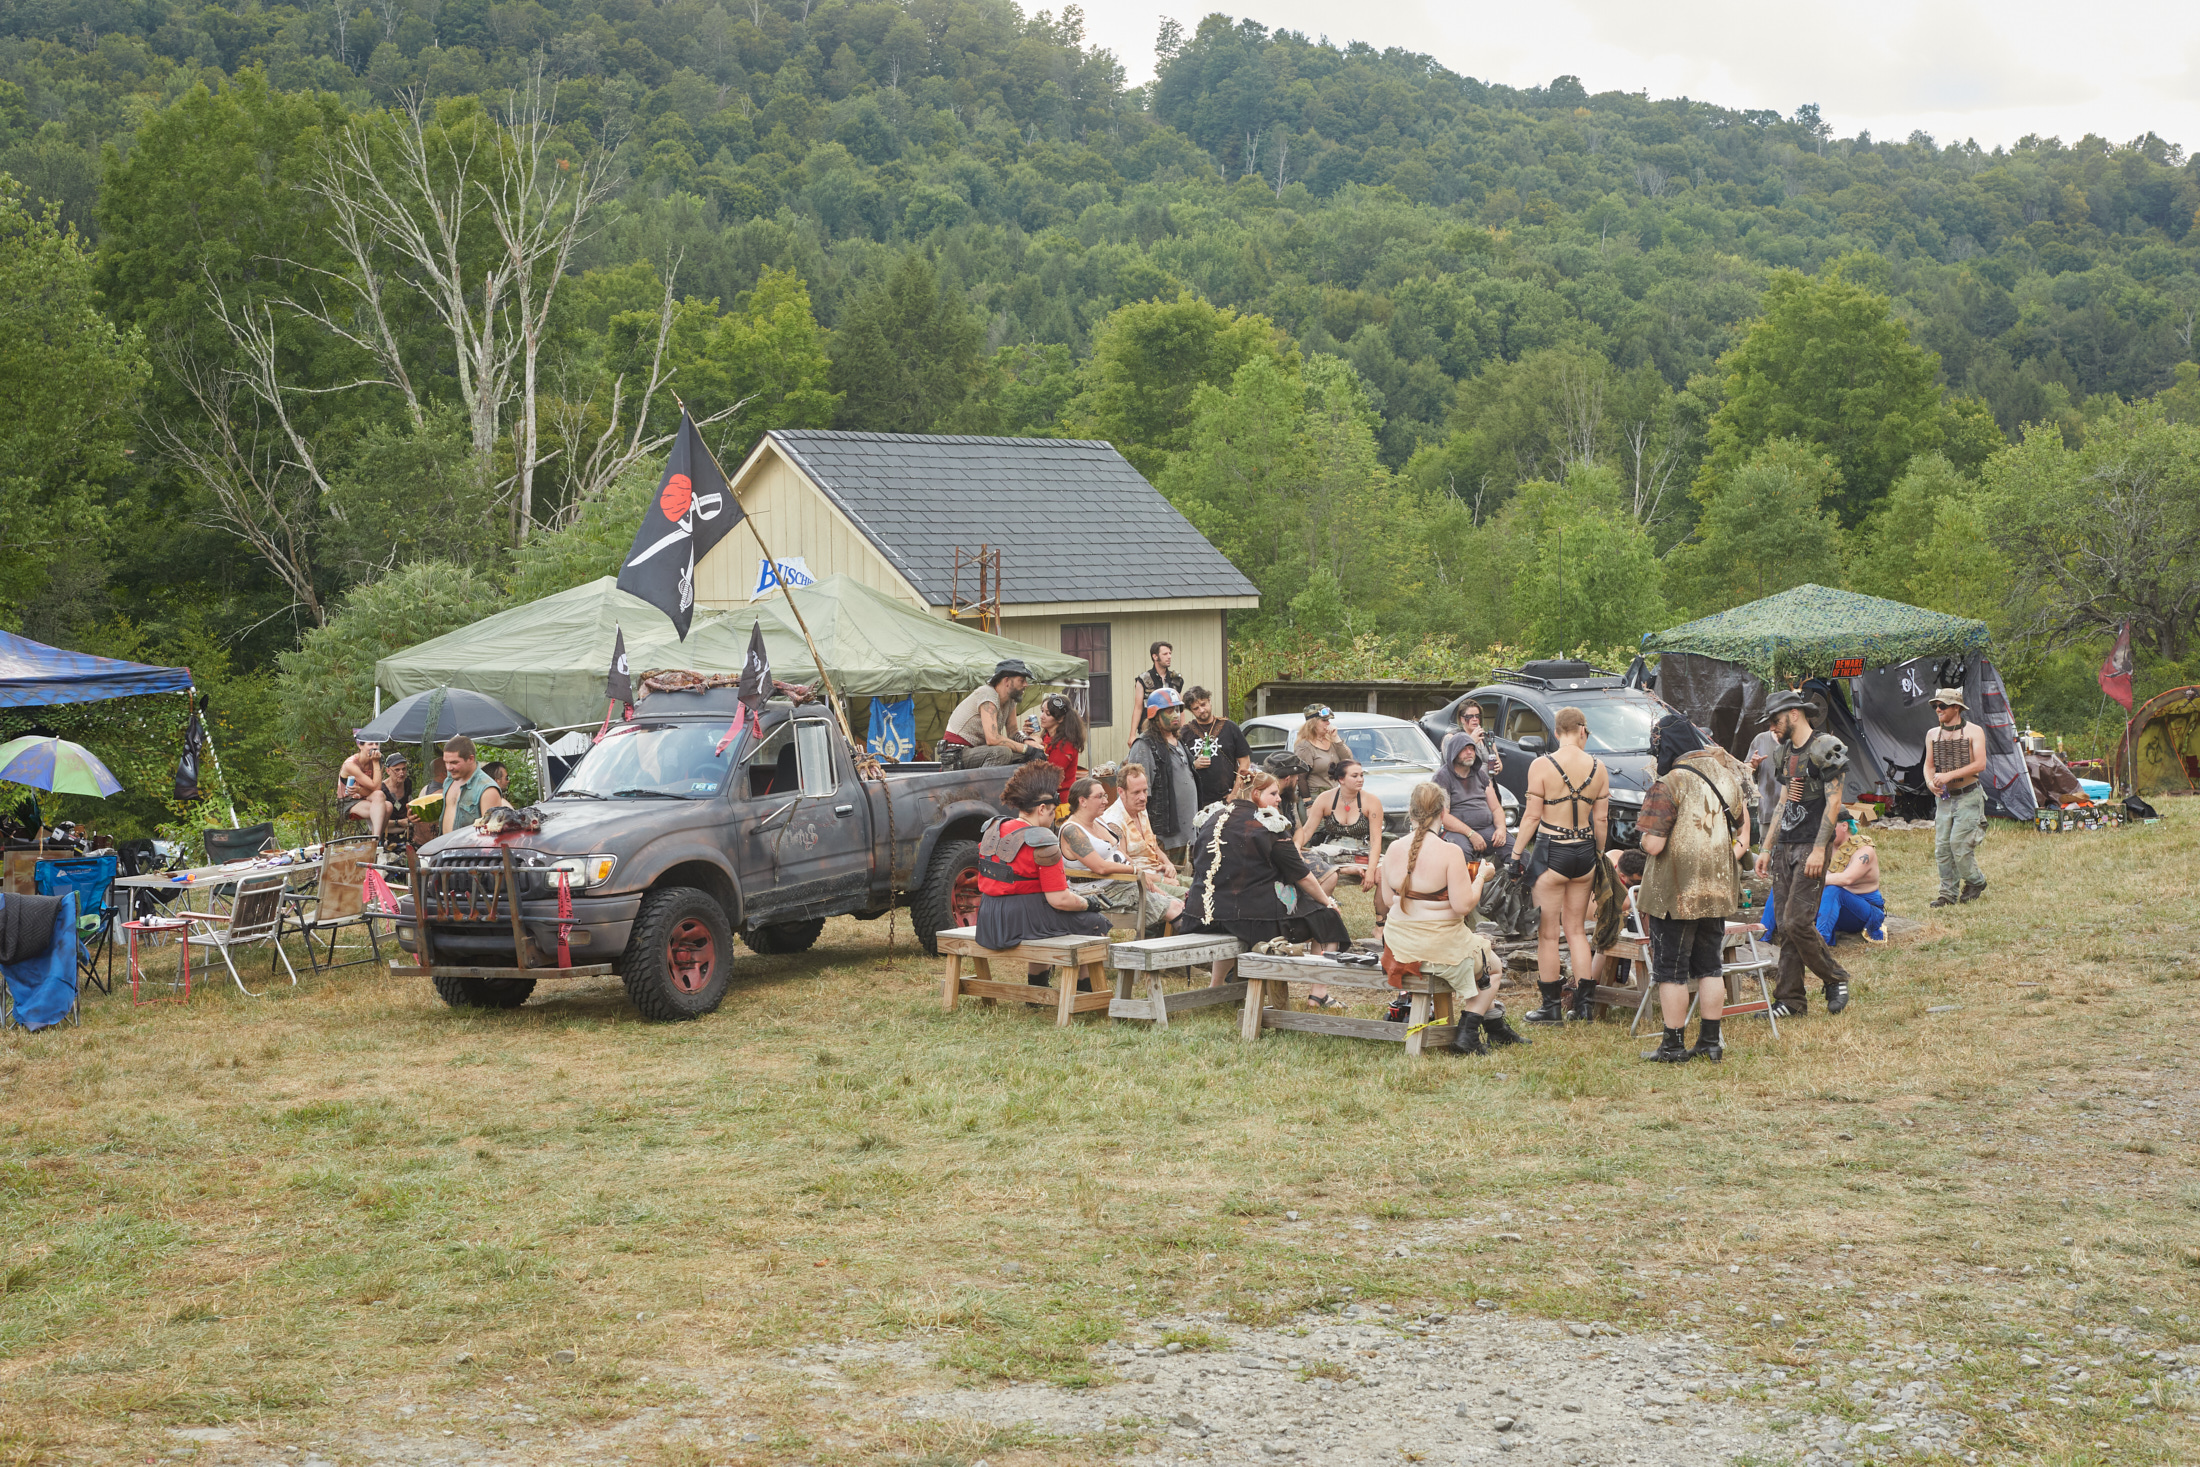 A group of attendees hang out in a field with tents and a post-apocalyptic themed truck